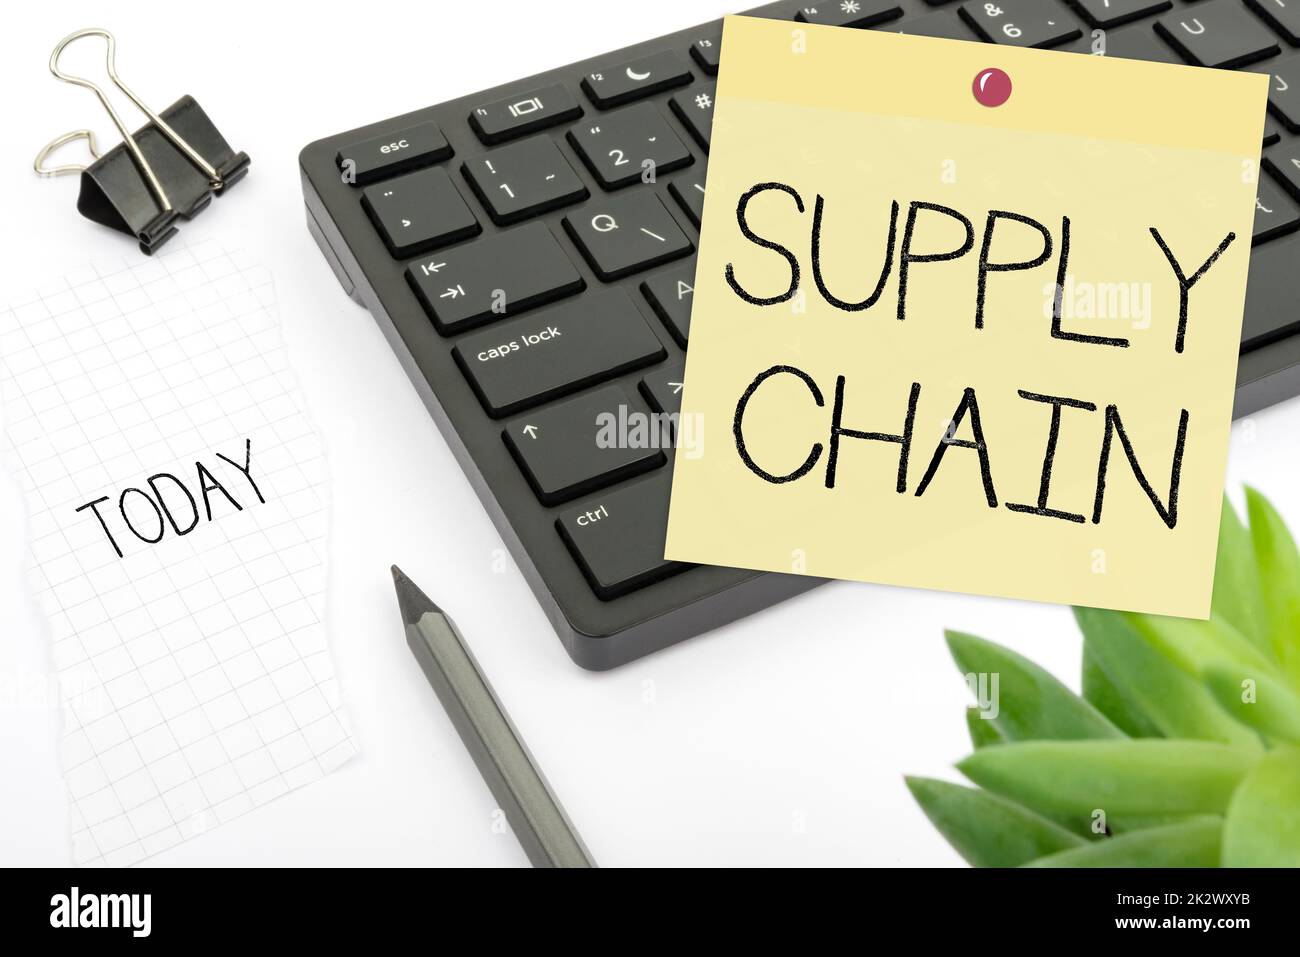 Conceptual display Supply Chain. Concept meaning System of organization and processes from supplier to consumer Computer Keyboard And Symbol.Information Medium For Communication. Stock Photo